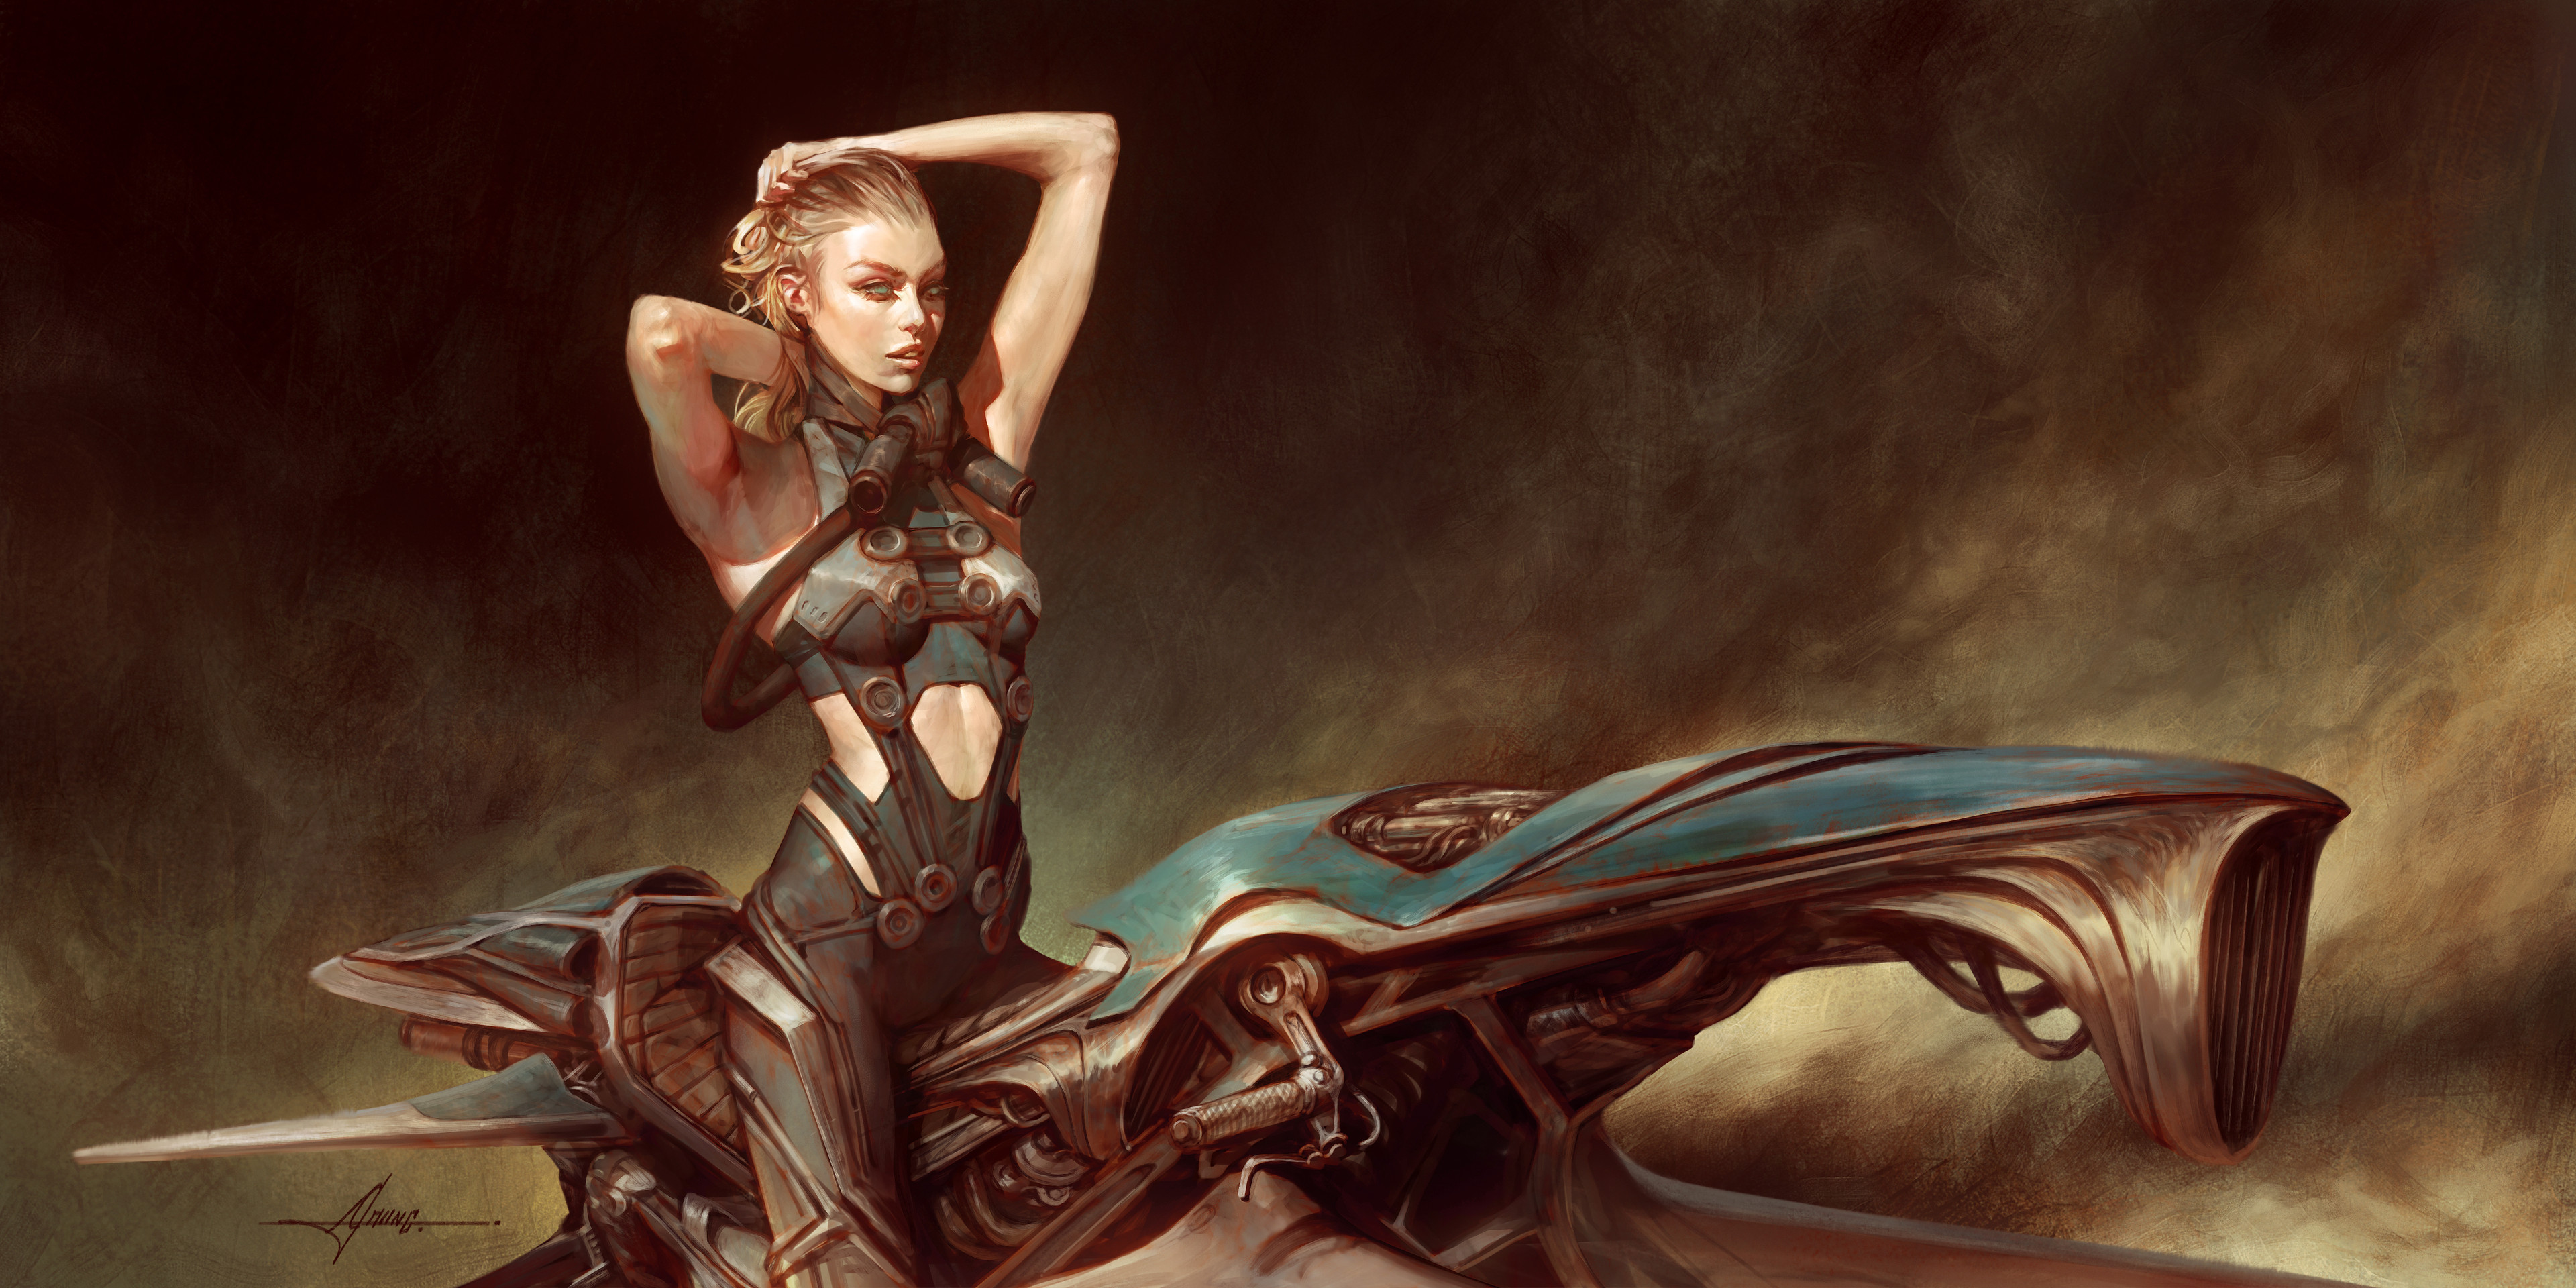 General 3840x1920 Christophe Young armpits ArtStation digital art green eyes women women with bikes motorcycle hands on head digital painting blonde looking into the distance artwork open mouth science fiction